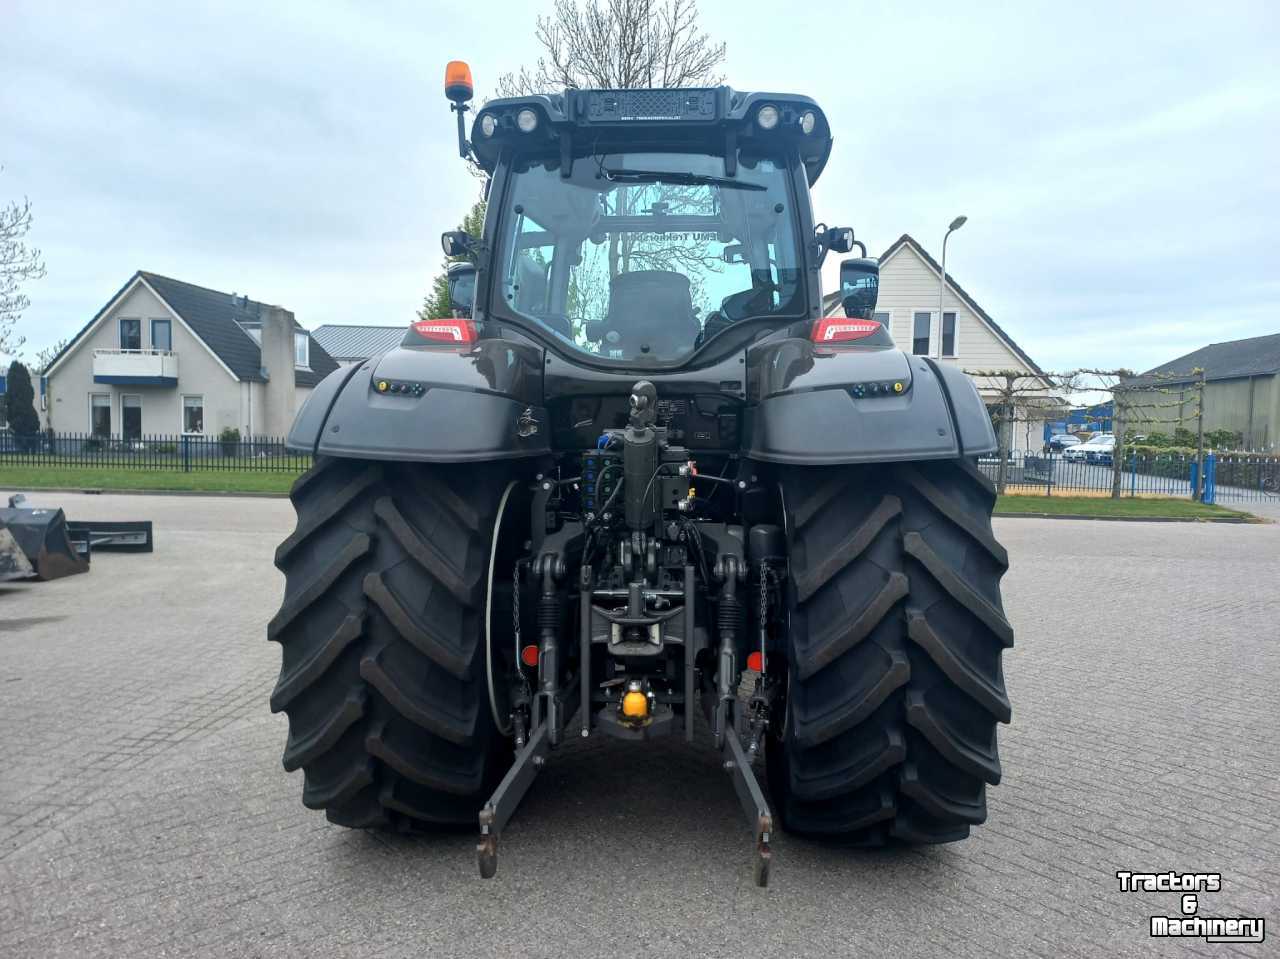 Tractors Valtra T174 Direct Smart Touch, 562 uur!